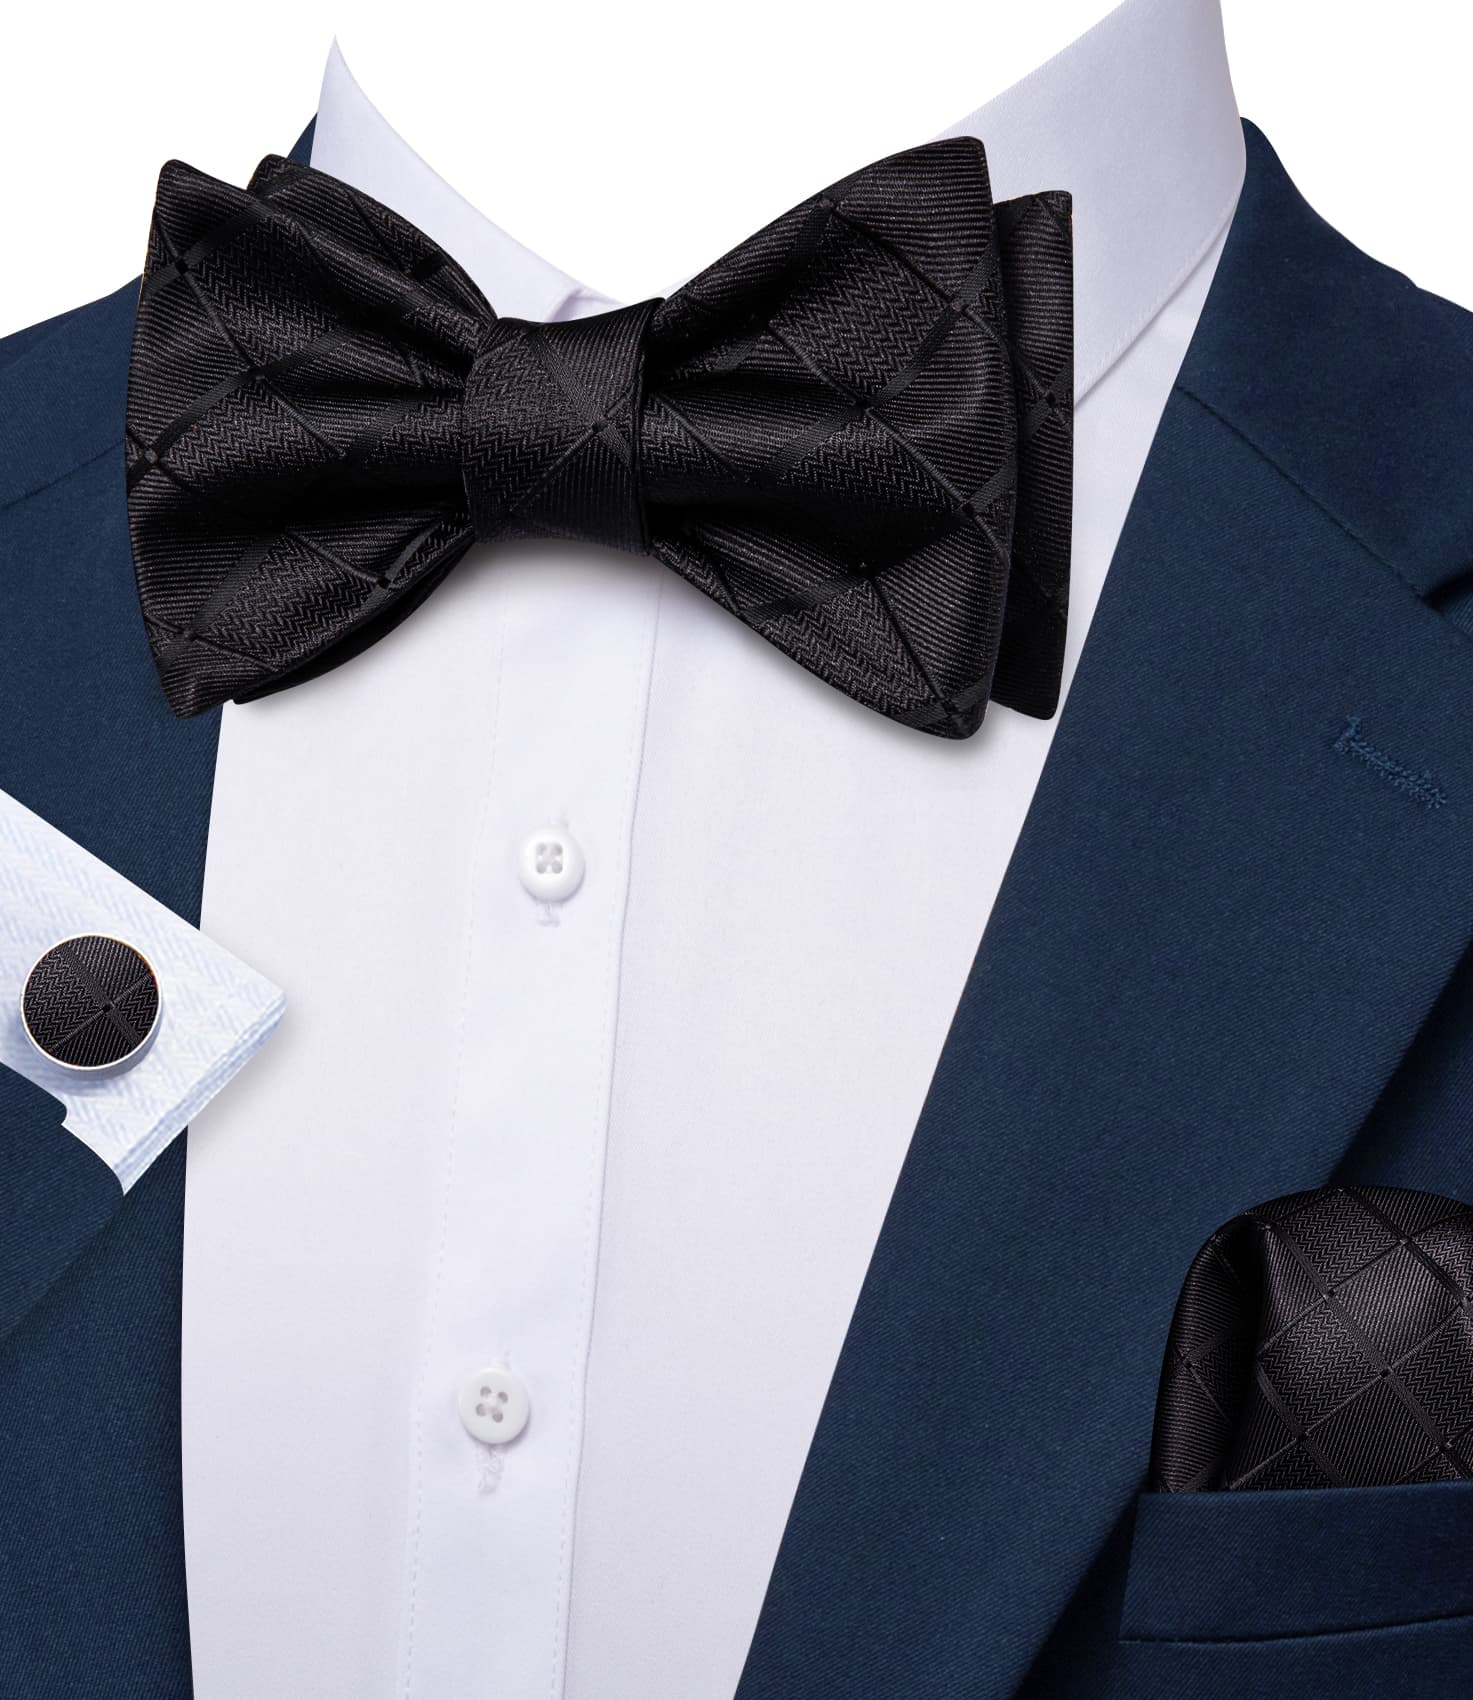 dark Blue suit and whith shirt black bowtie formal 